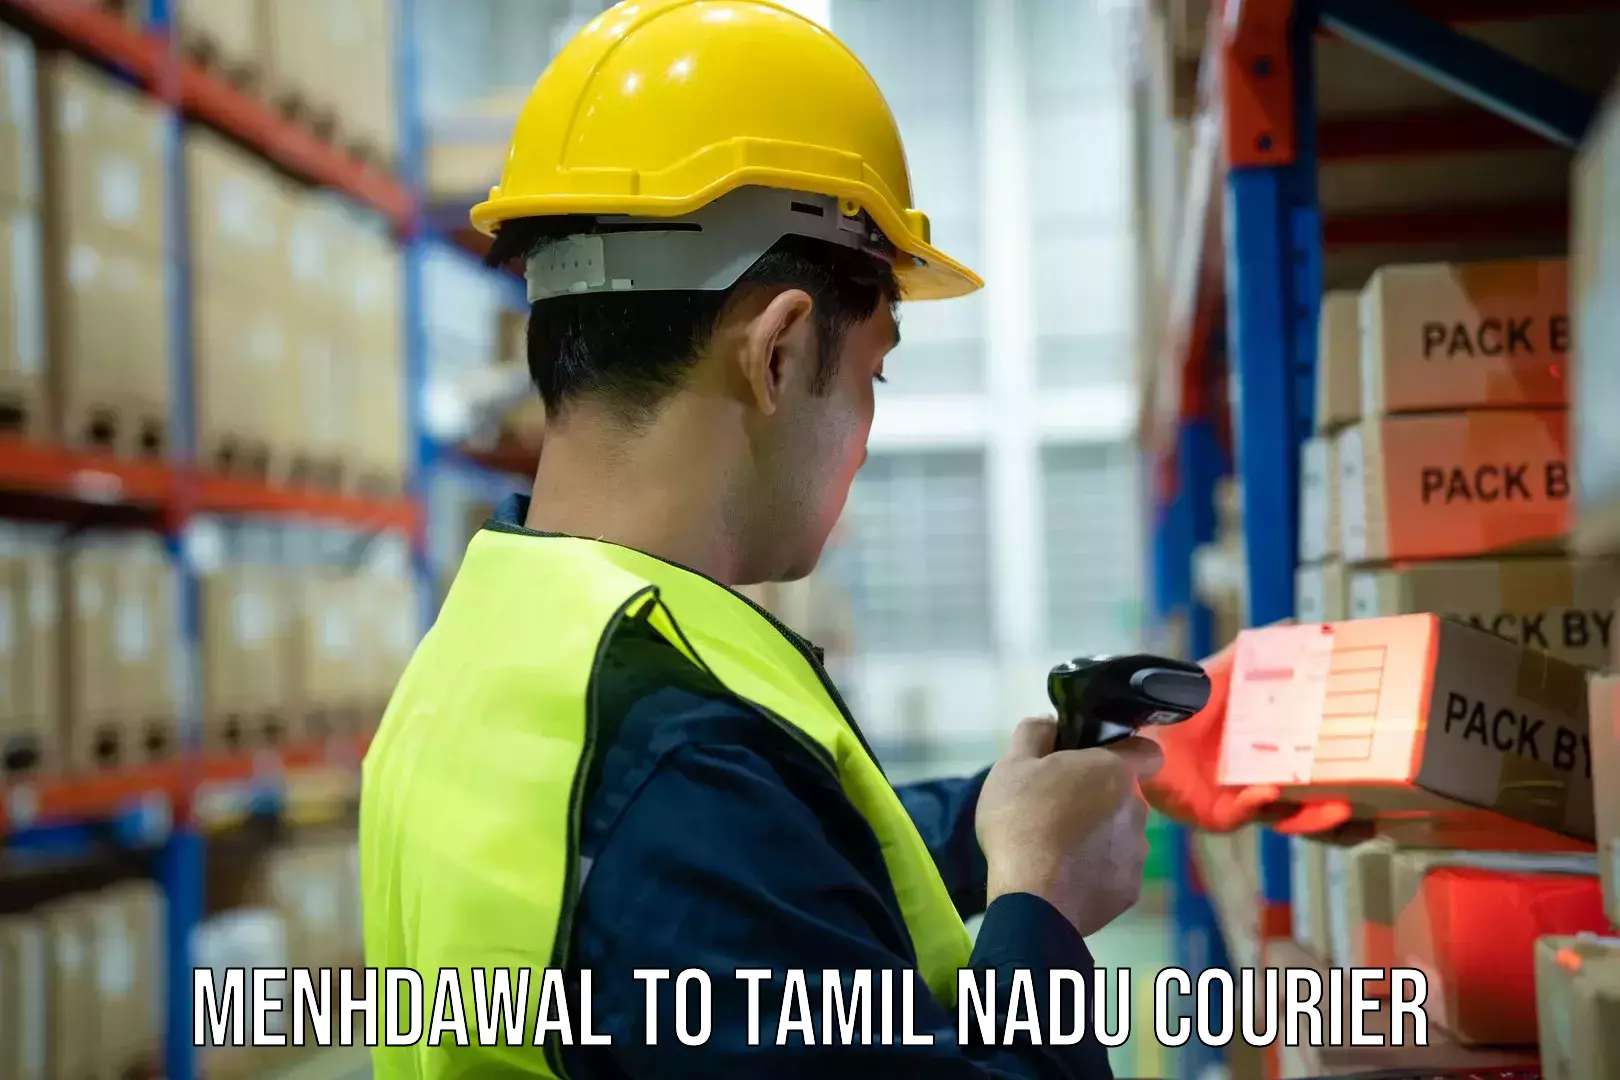 On-call courier service Menhdawal to Tuticorin